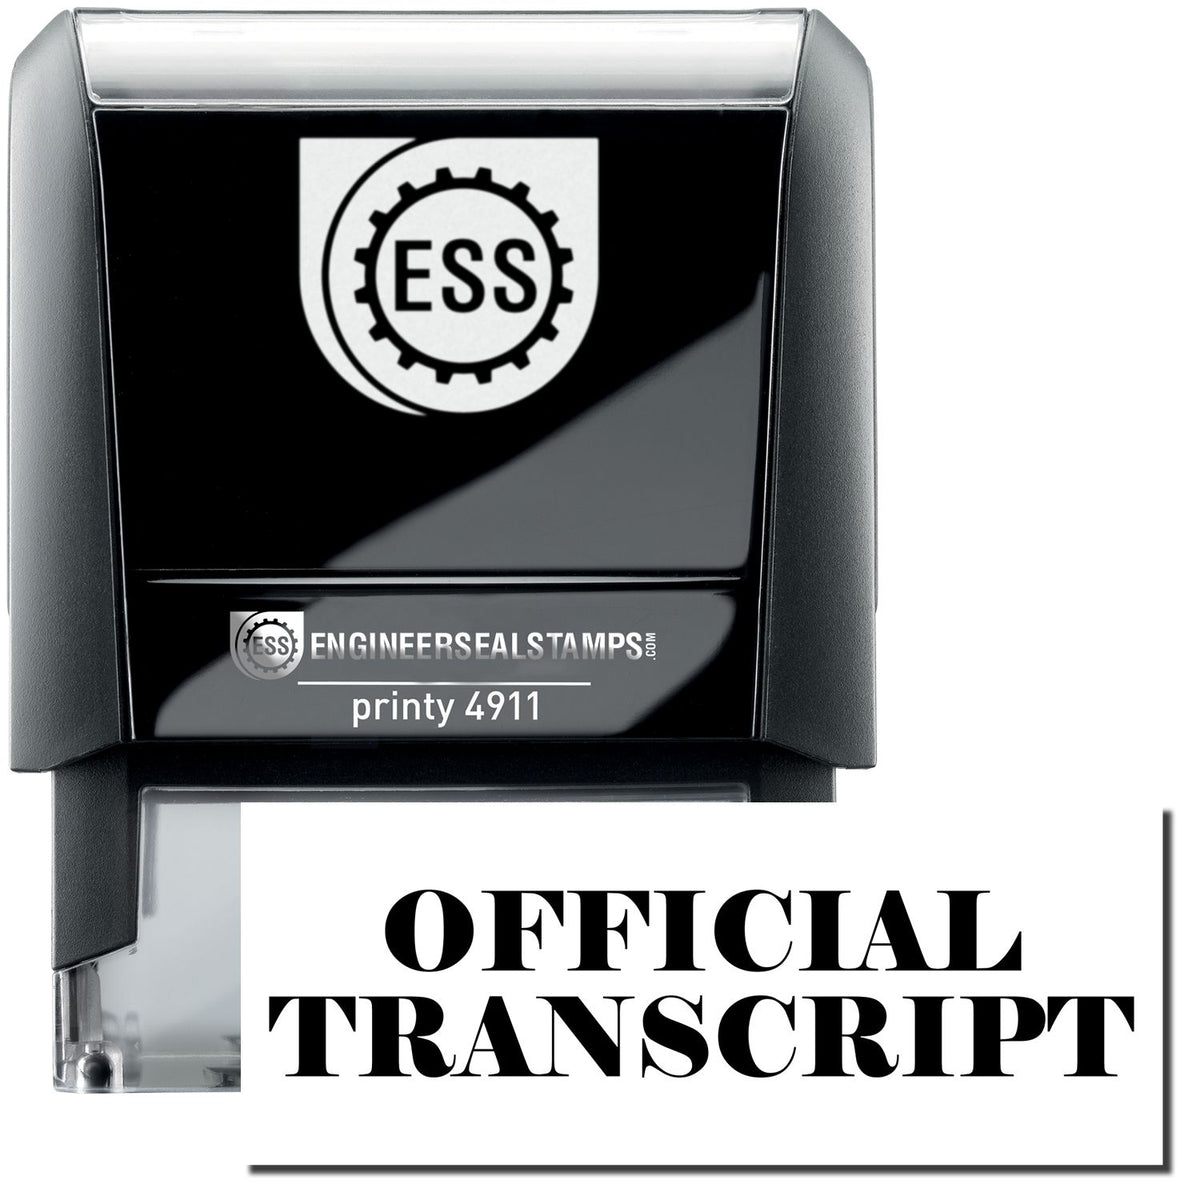 A self-inking stamp with a stamped image showing how the text &quot;OFFICIAL TRANSCRIPT&quot; is displayed after stamping.